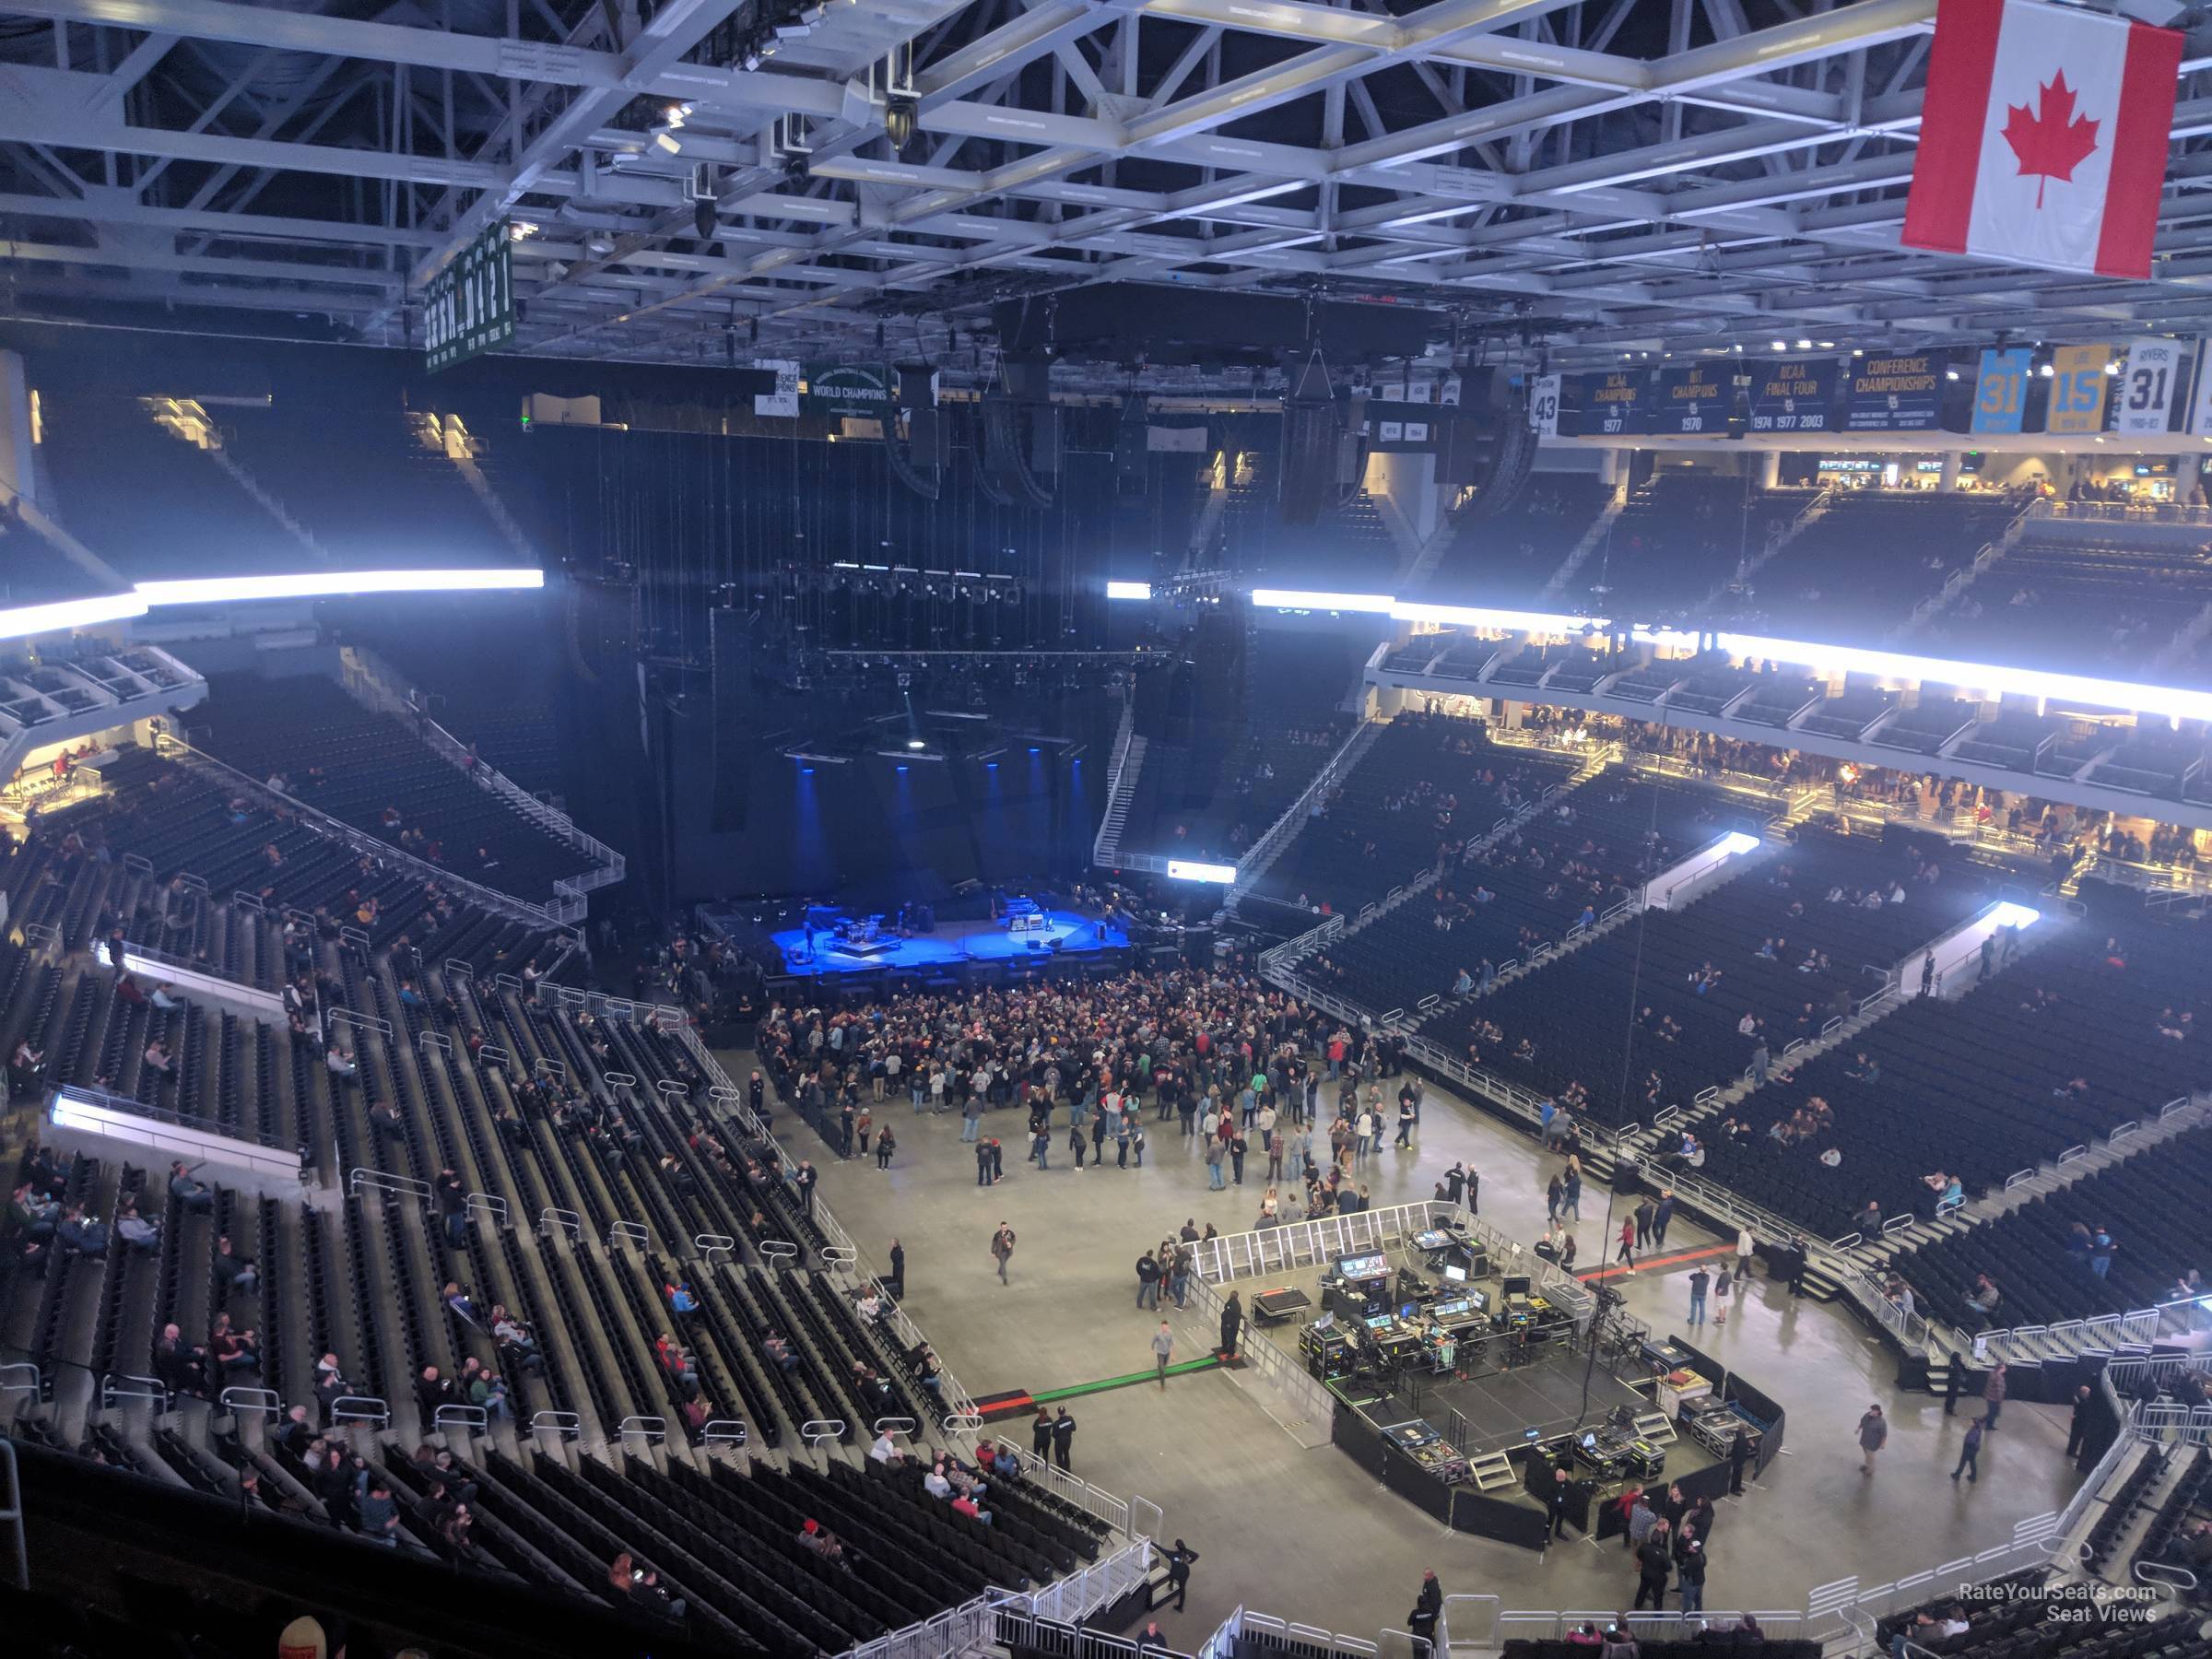 section 203, row 8 seat view  for concert - fiserv forum